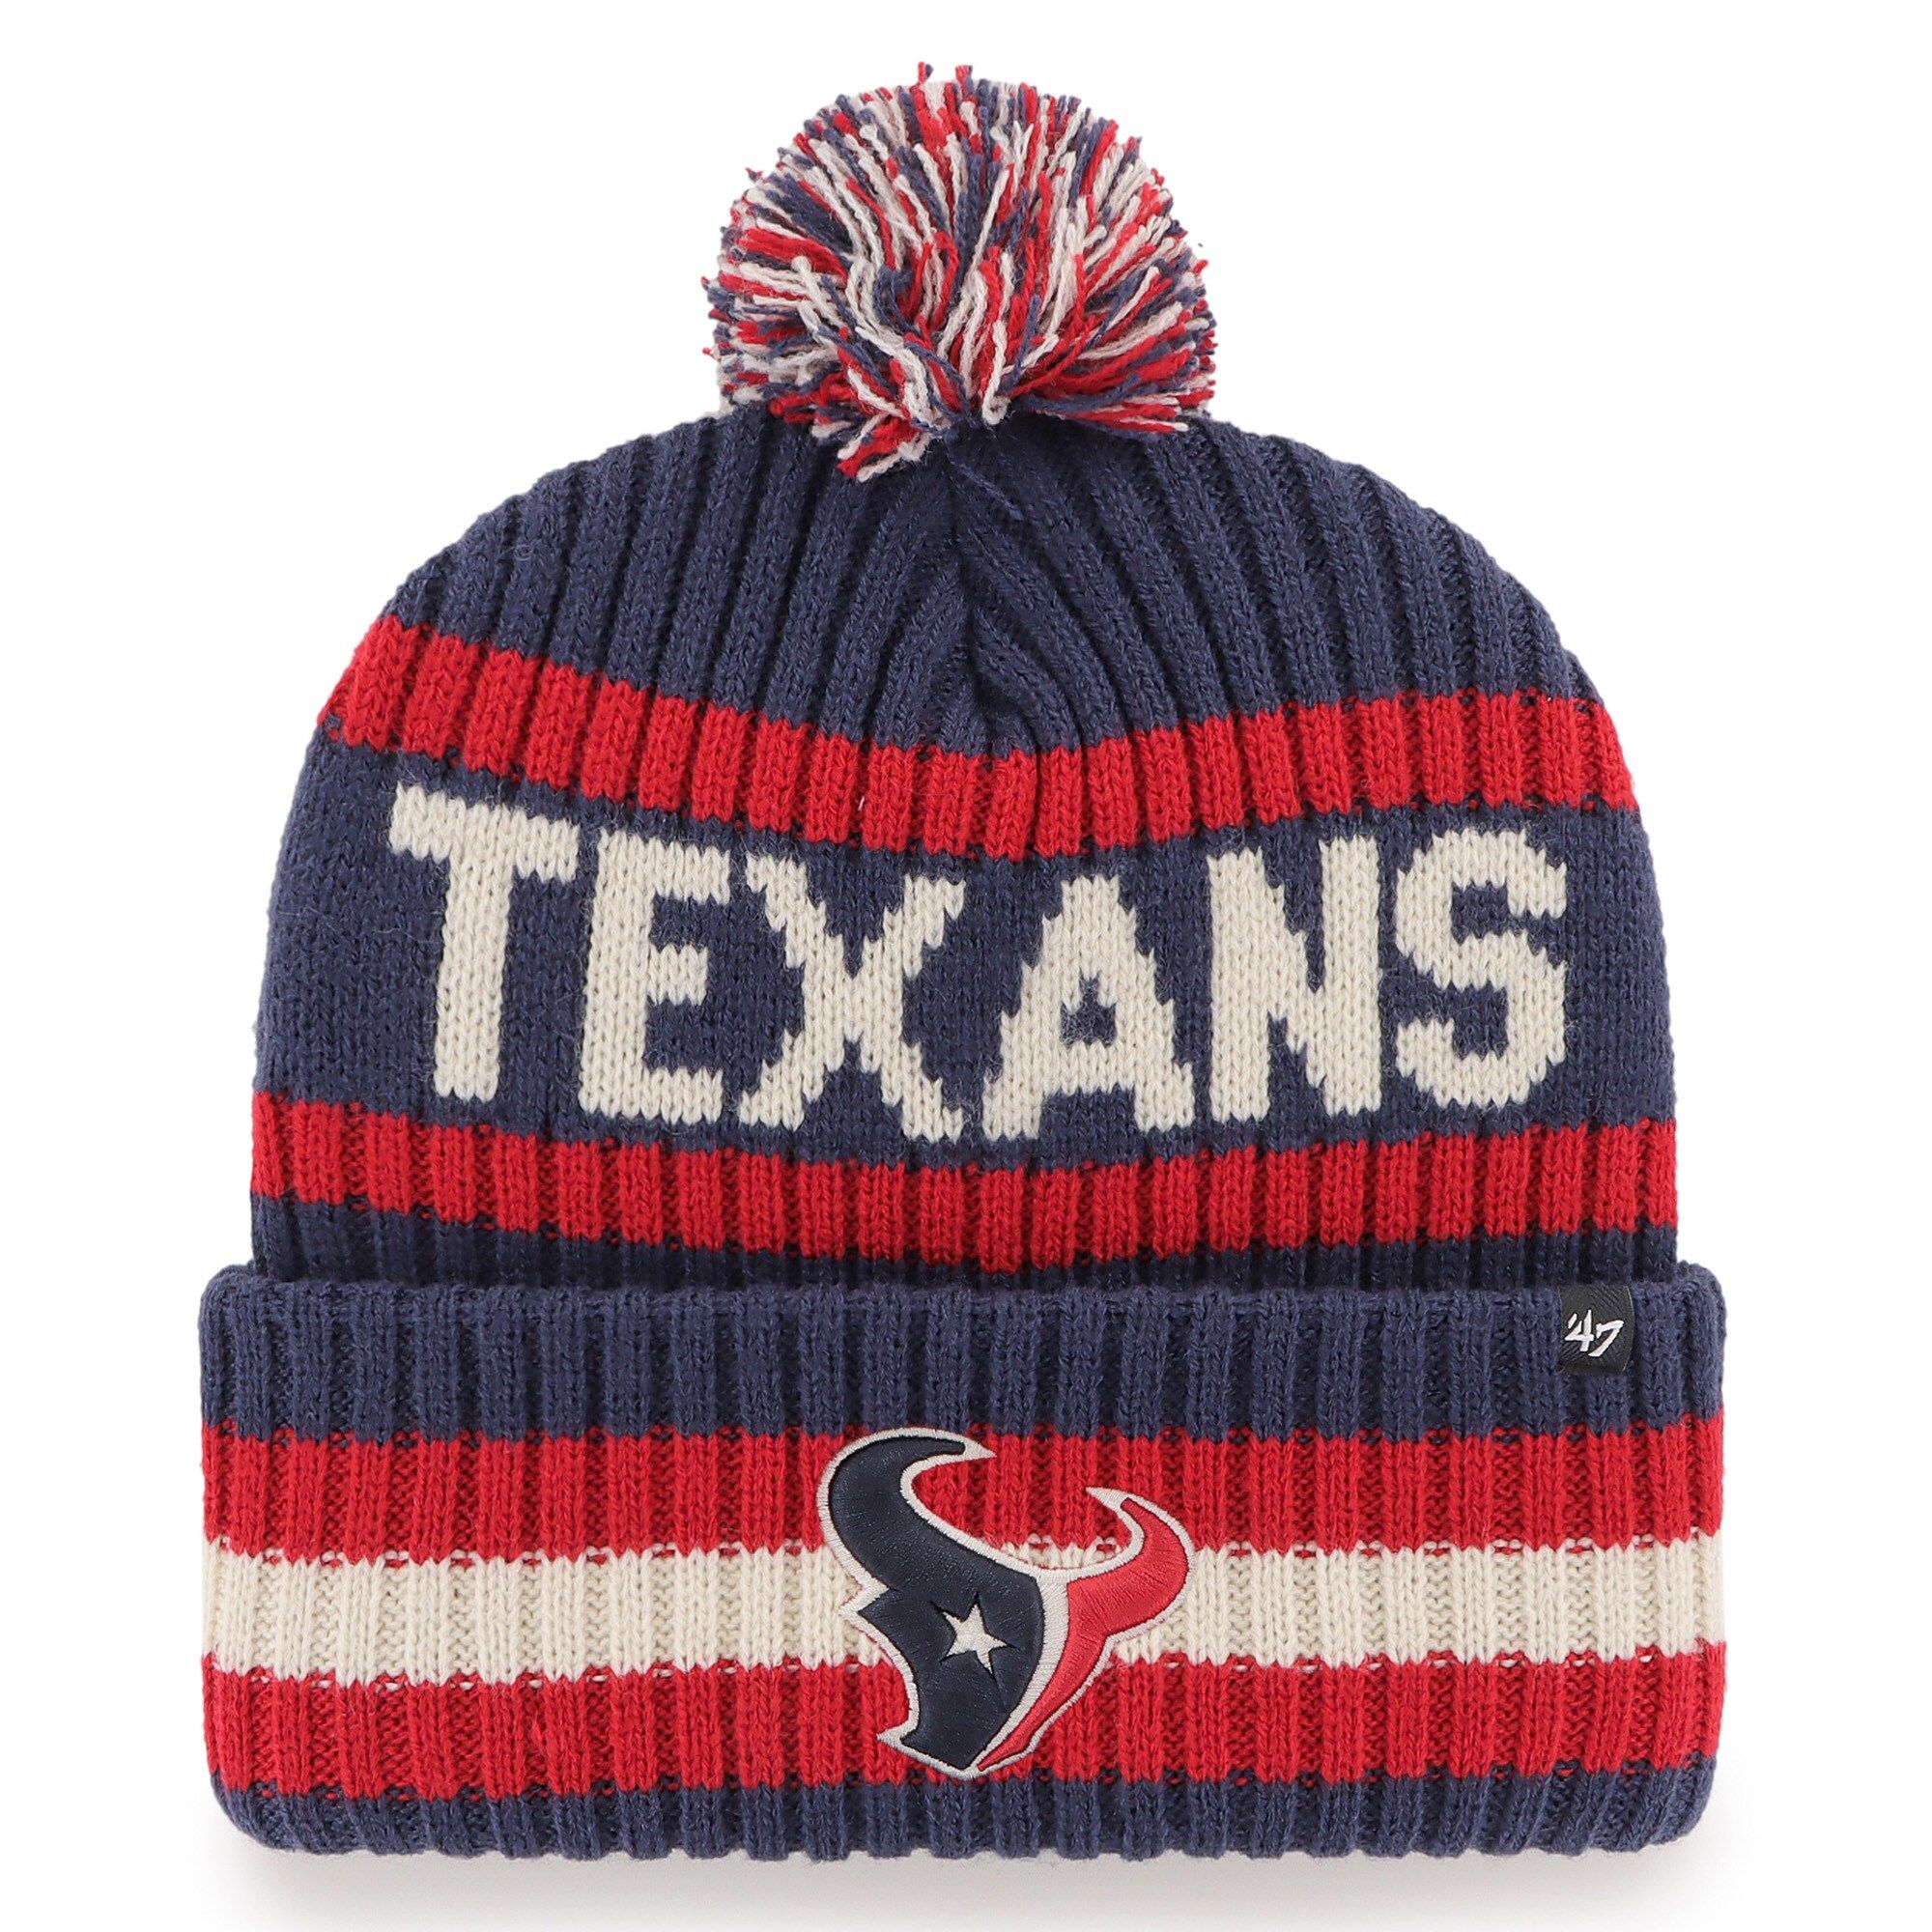 Men's Houston Texans  '47 Navy Bering Cuffed Knit Hat with Pom | NFL Shop